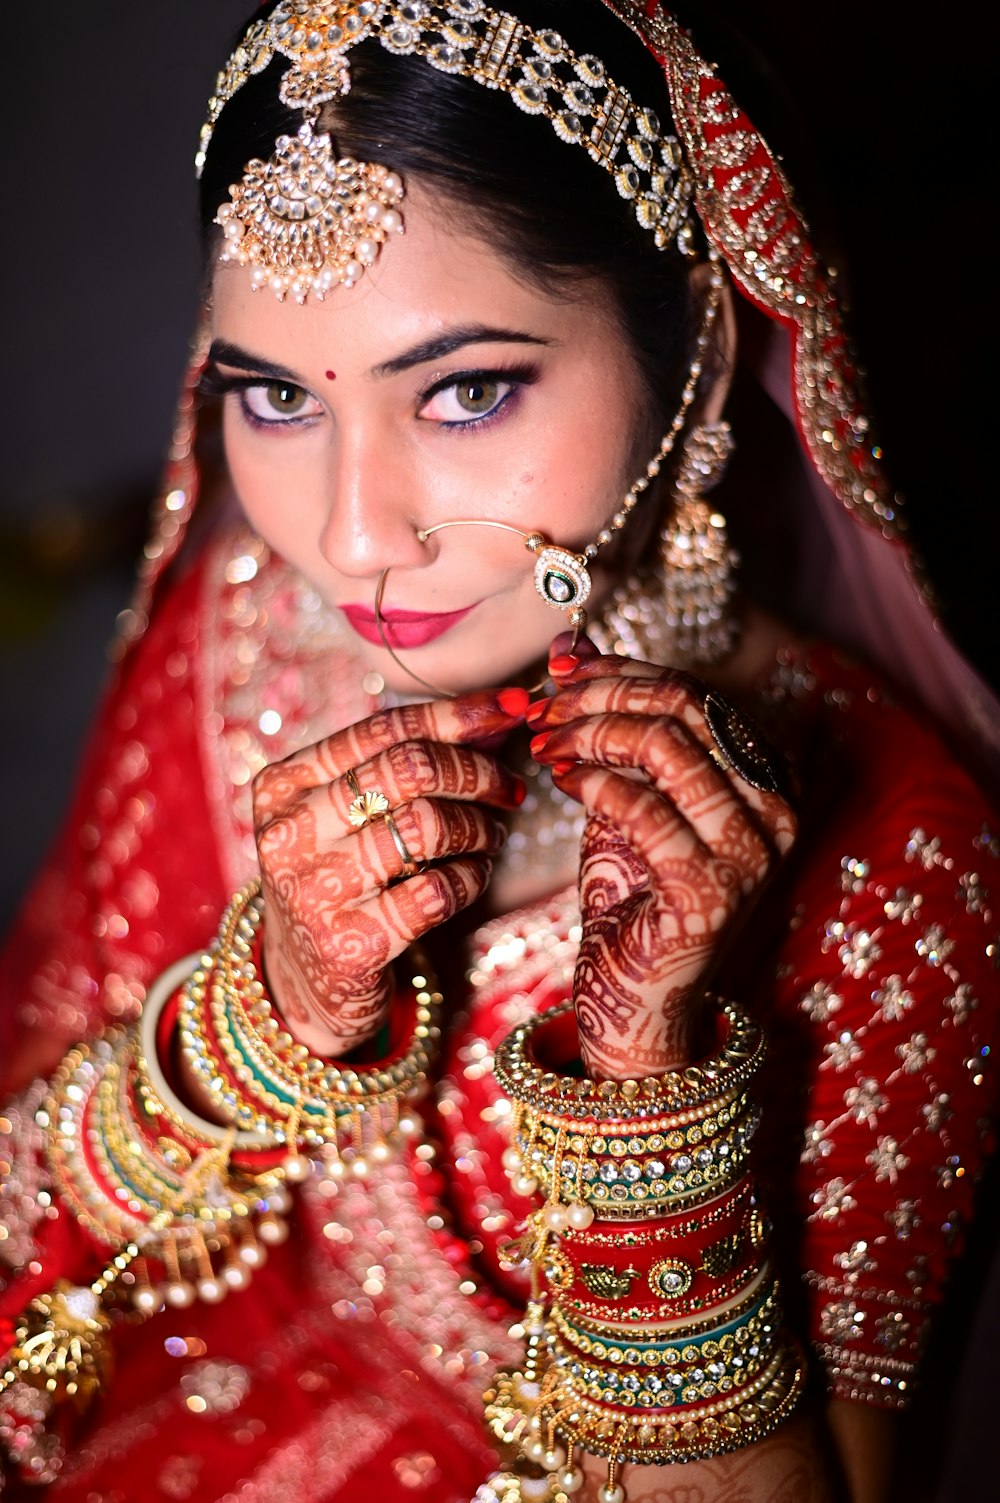 a woman in a red outfit with jewelry on her hands